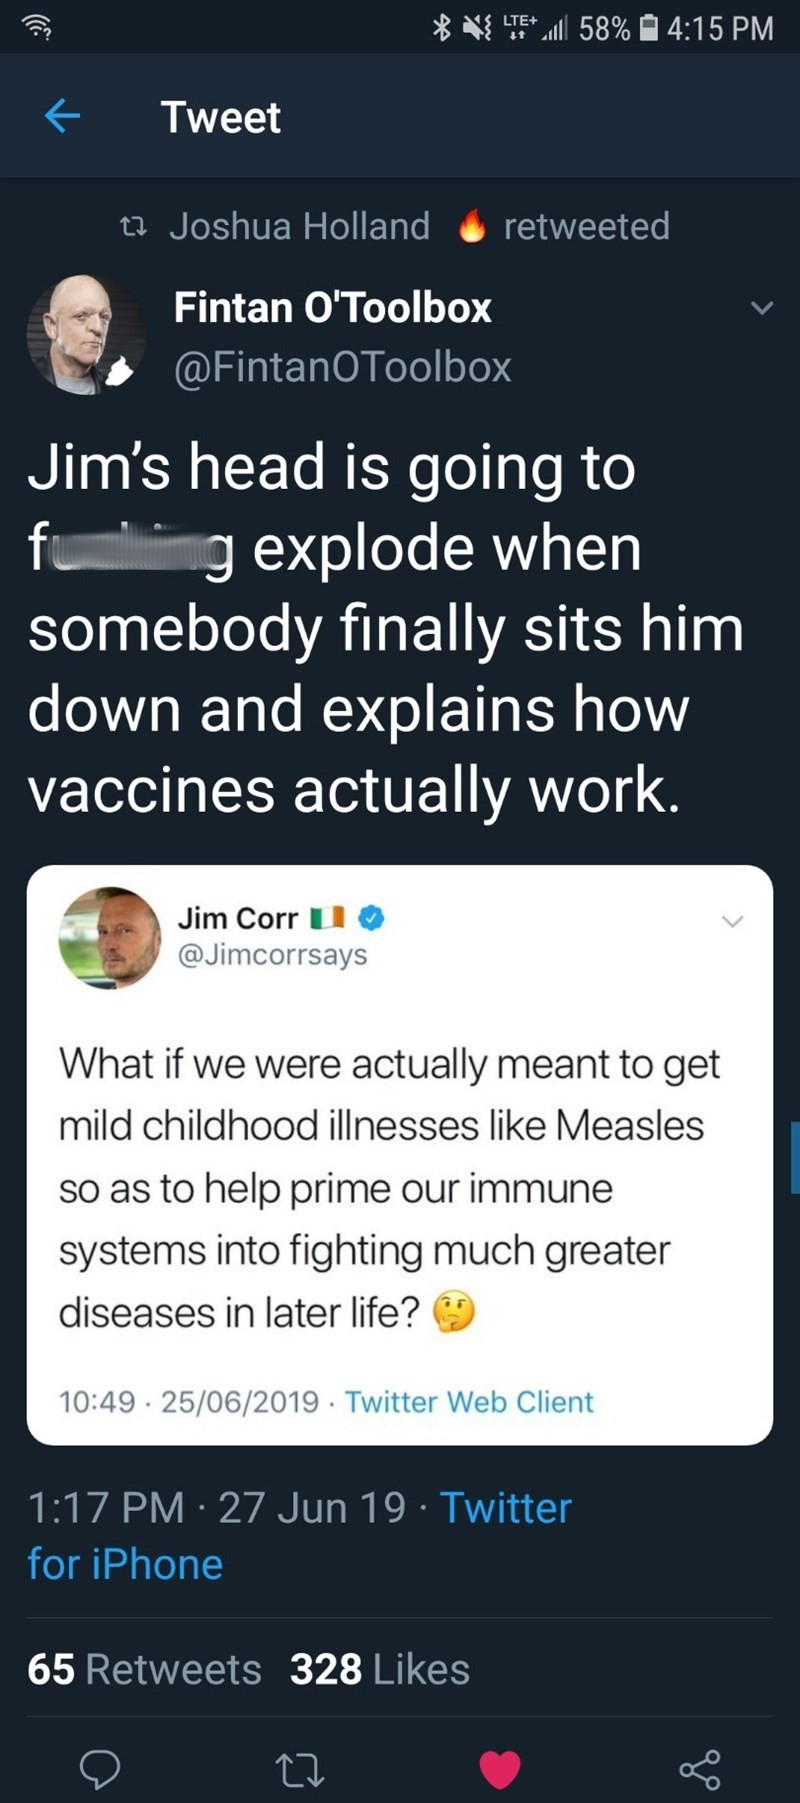 screenshot - ' Velte 58% Tweet 27 Joshua Holland retweeted, Fintan O'Toolbox Toolbox Jim's head is going to fung explode when somebody finally sits him down and explains how vaccines actually work. Jim Corr U What if we were actually meant to get mild chi